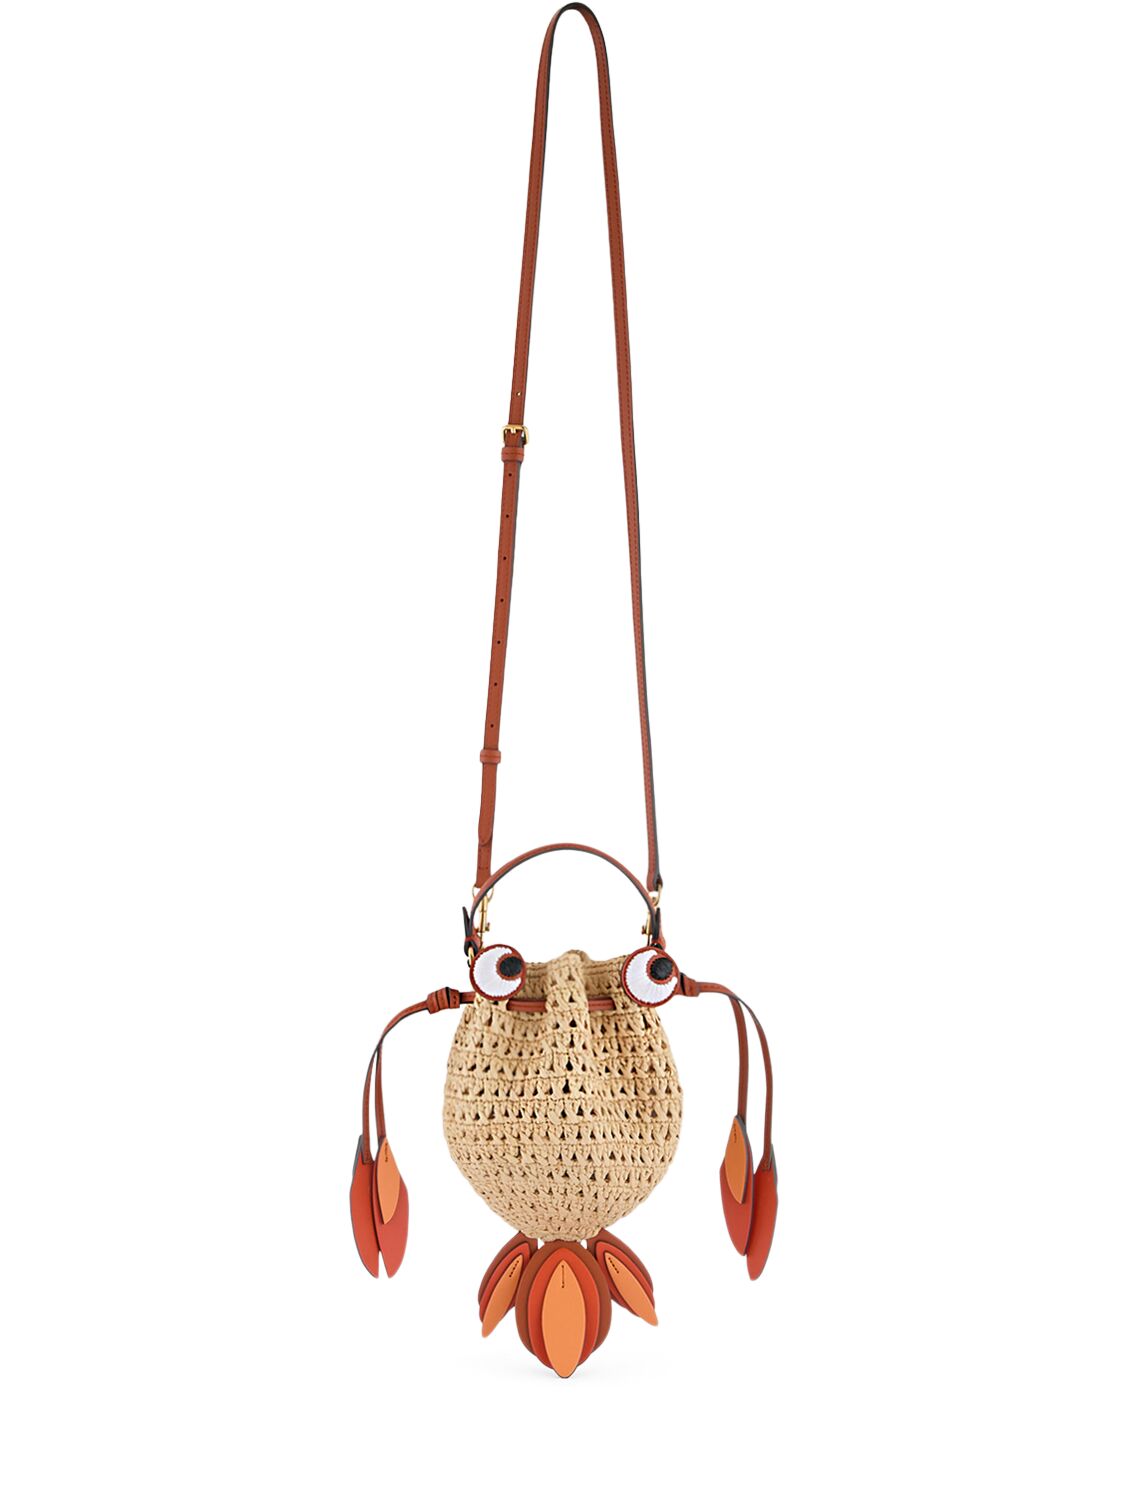 Anya Hindmarch Goldfish Raffia & Smooth Leather Bag In Natural,clement